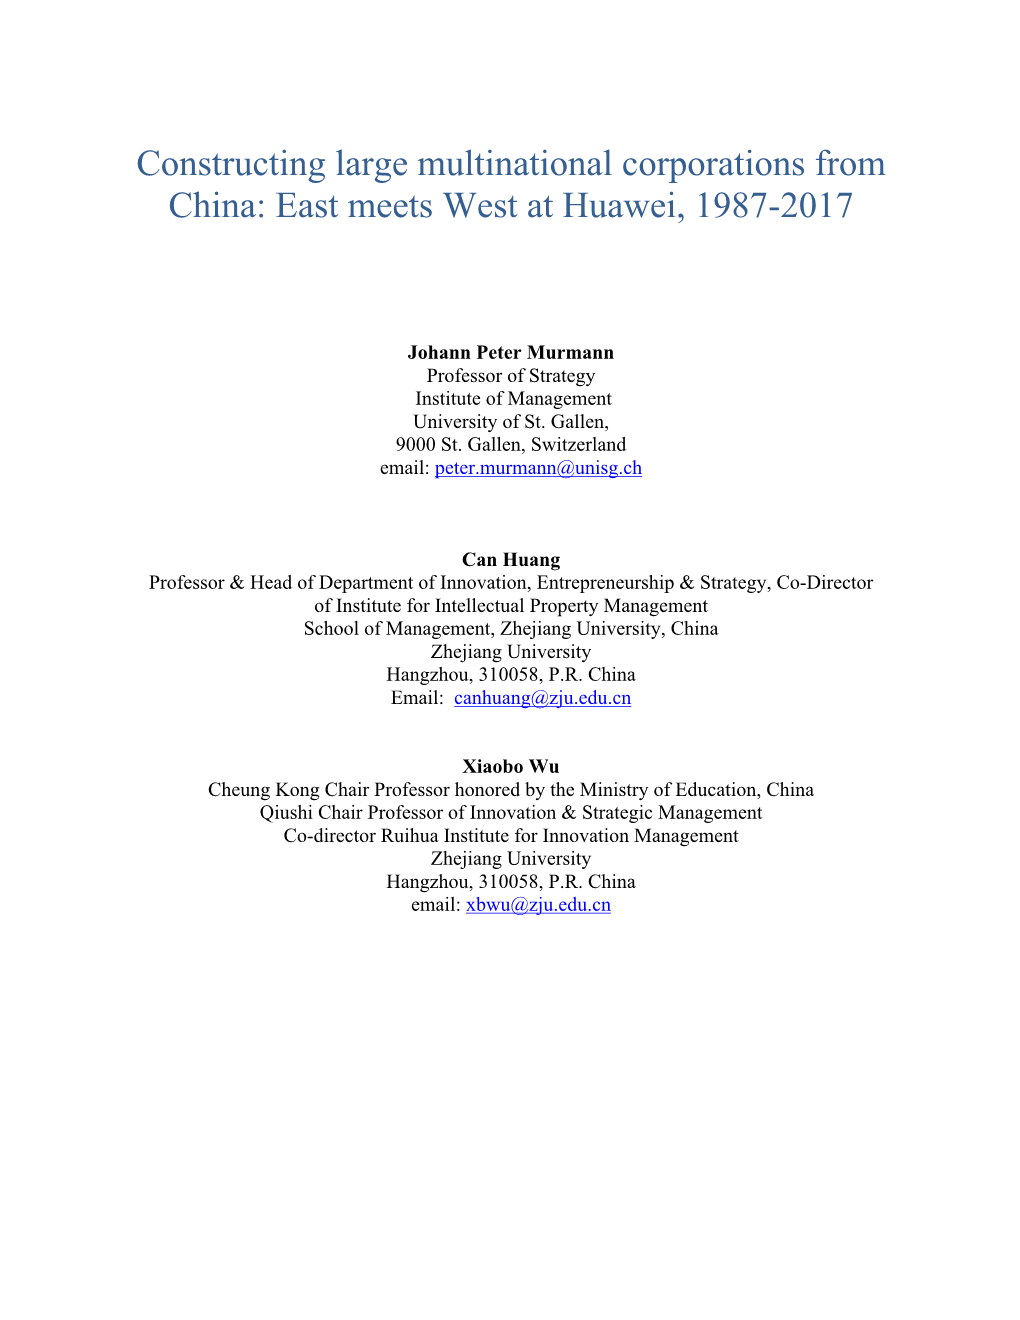 Constructing Large Multinational Corporations from China: East Meets West at Huawei, 1987-2017